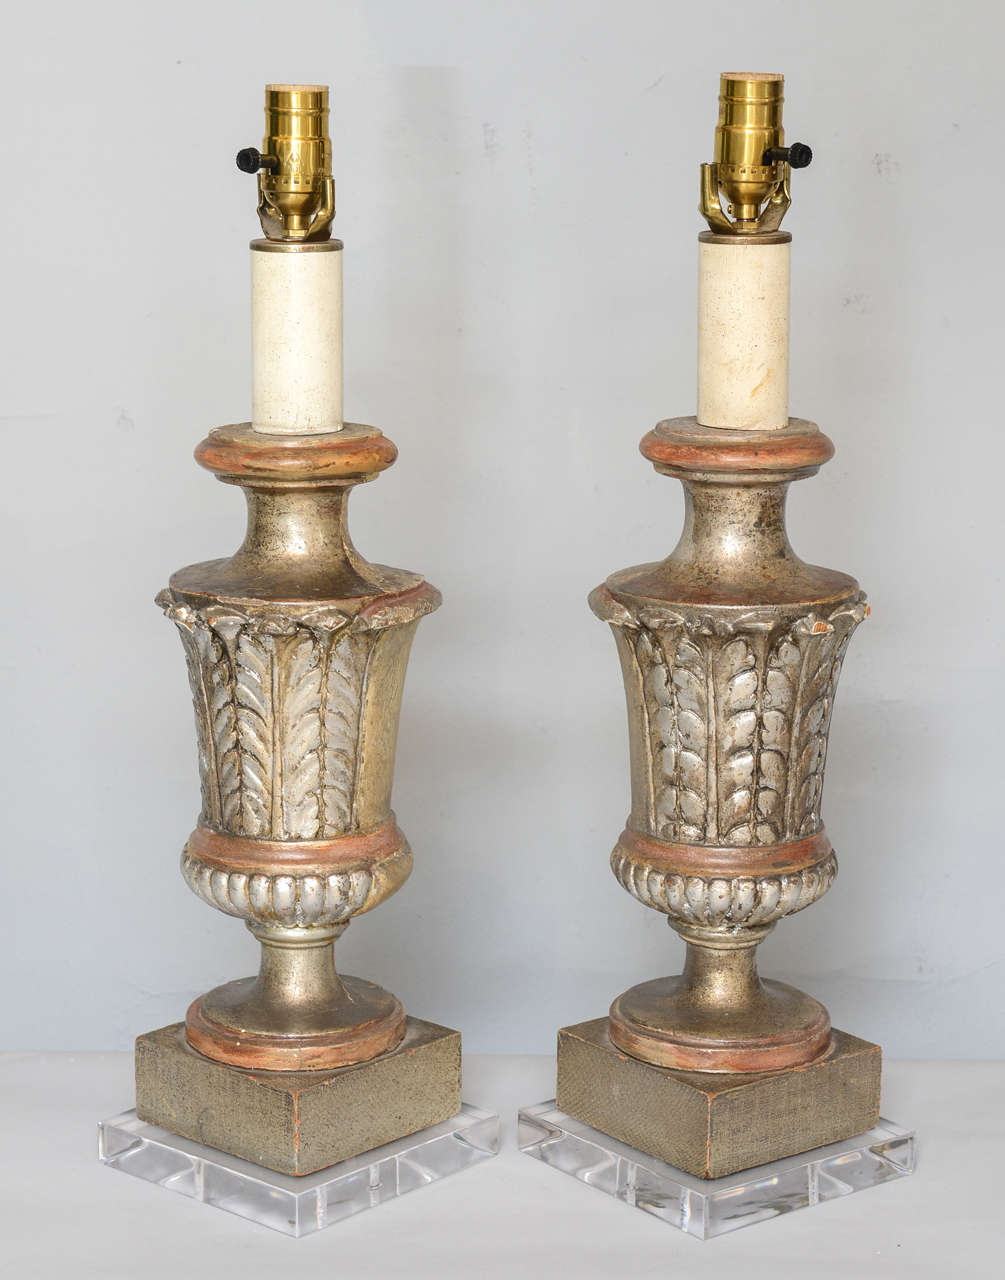 Pair of lamps, each a carved wooden urn-shaped finial, painted and parcel silvergilt over gesso, the front decorated with acanthus leaves, on round foot, lamped on square custom Lucite bases.

Stock ID: D4127